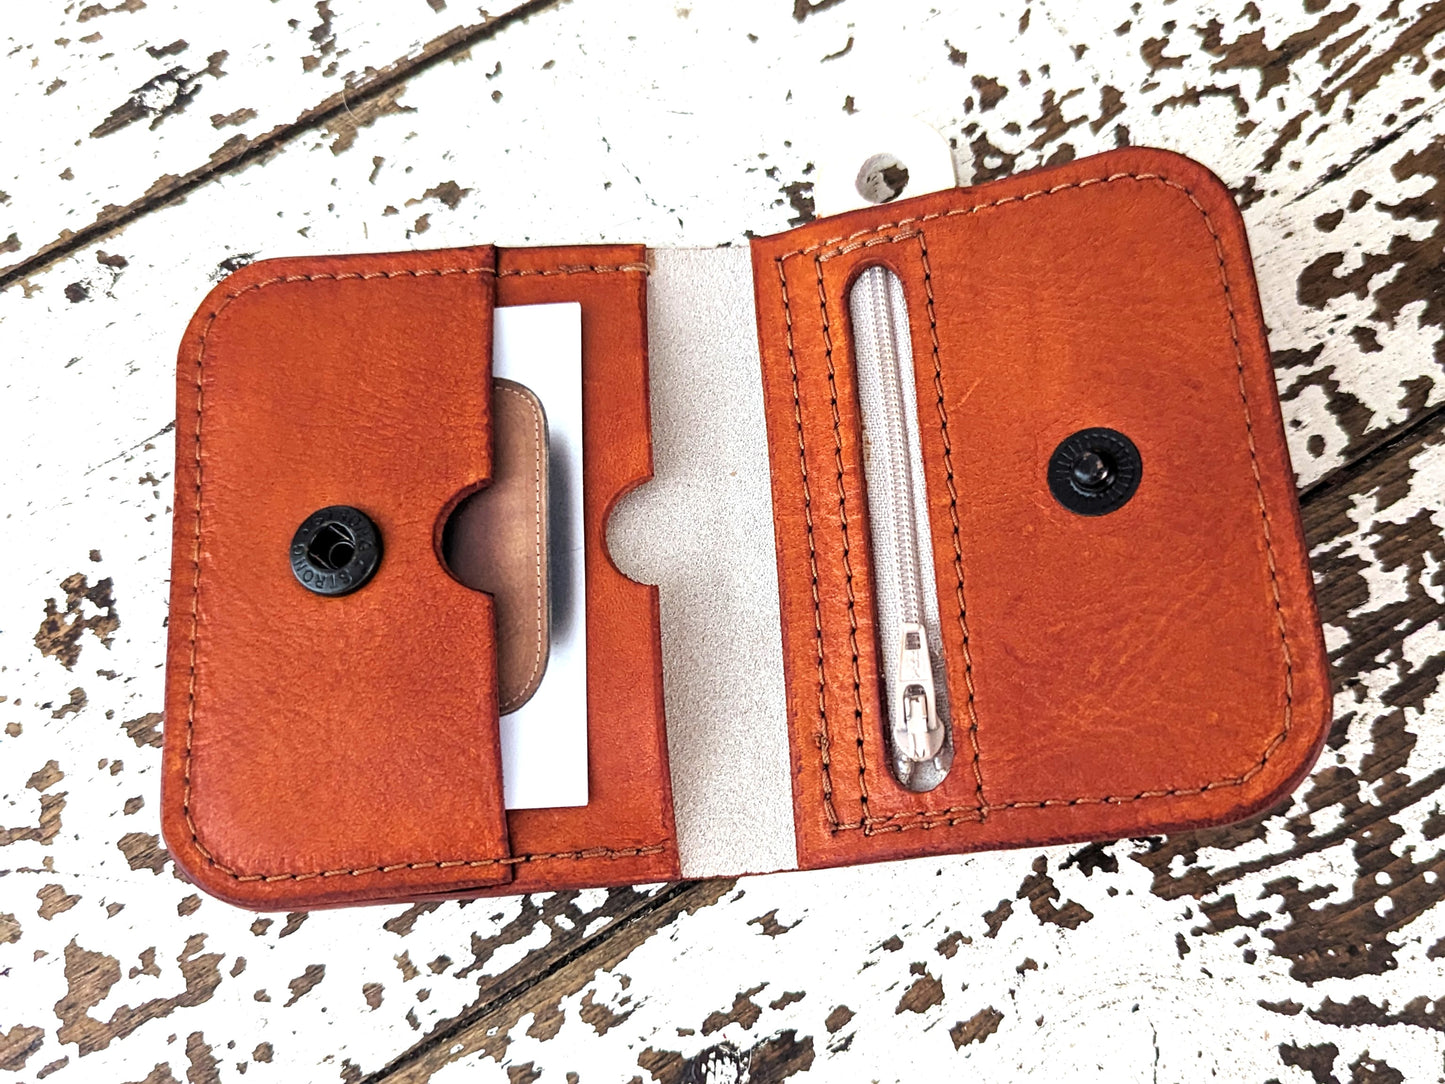 The Folded Wallet